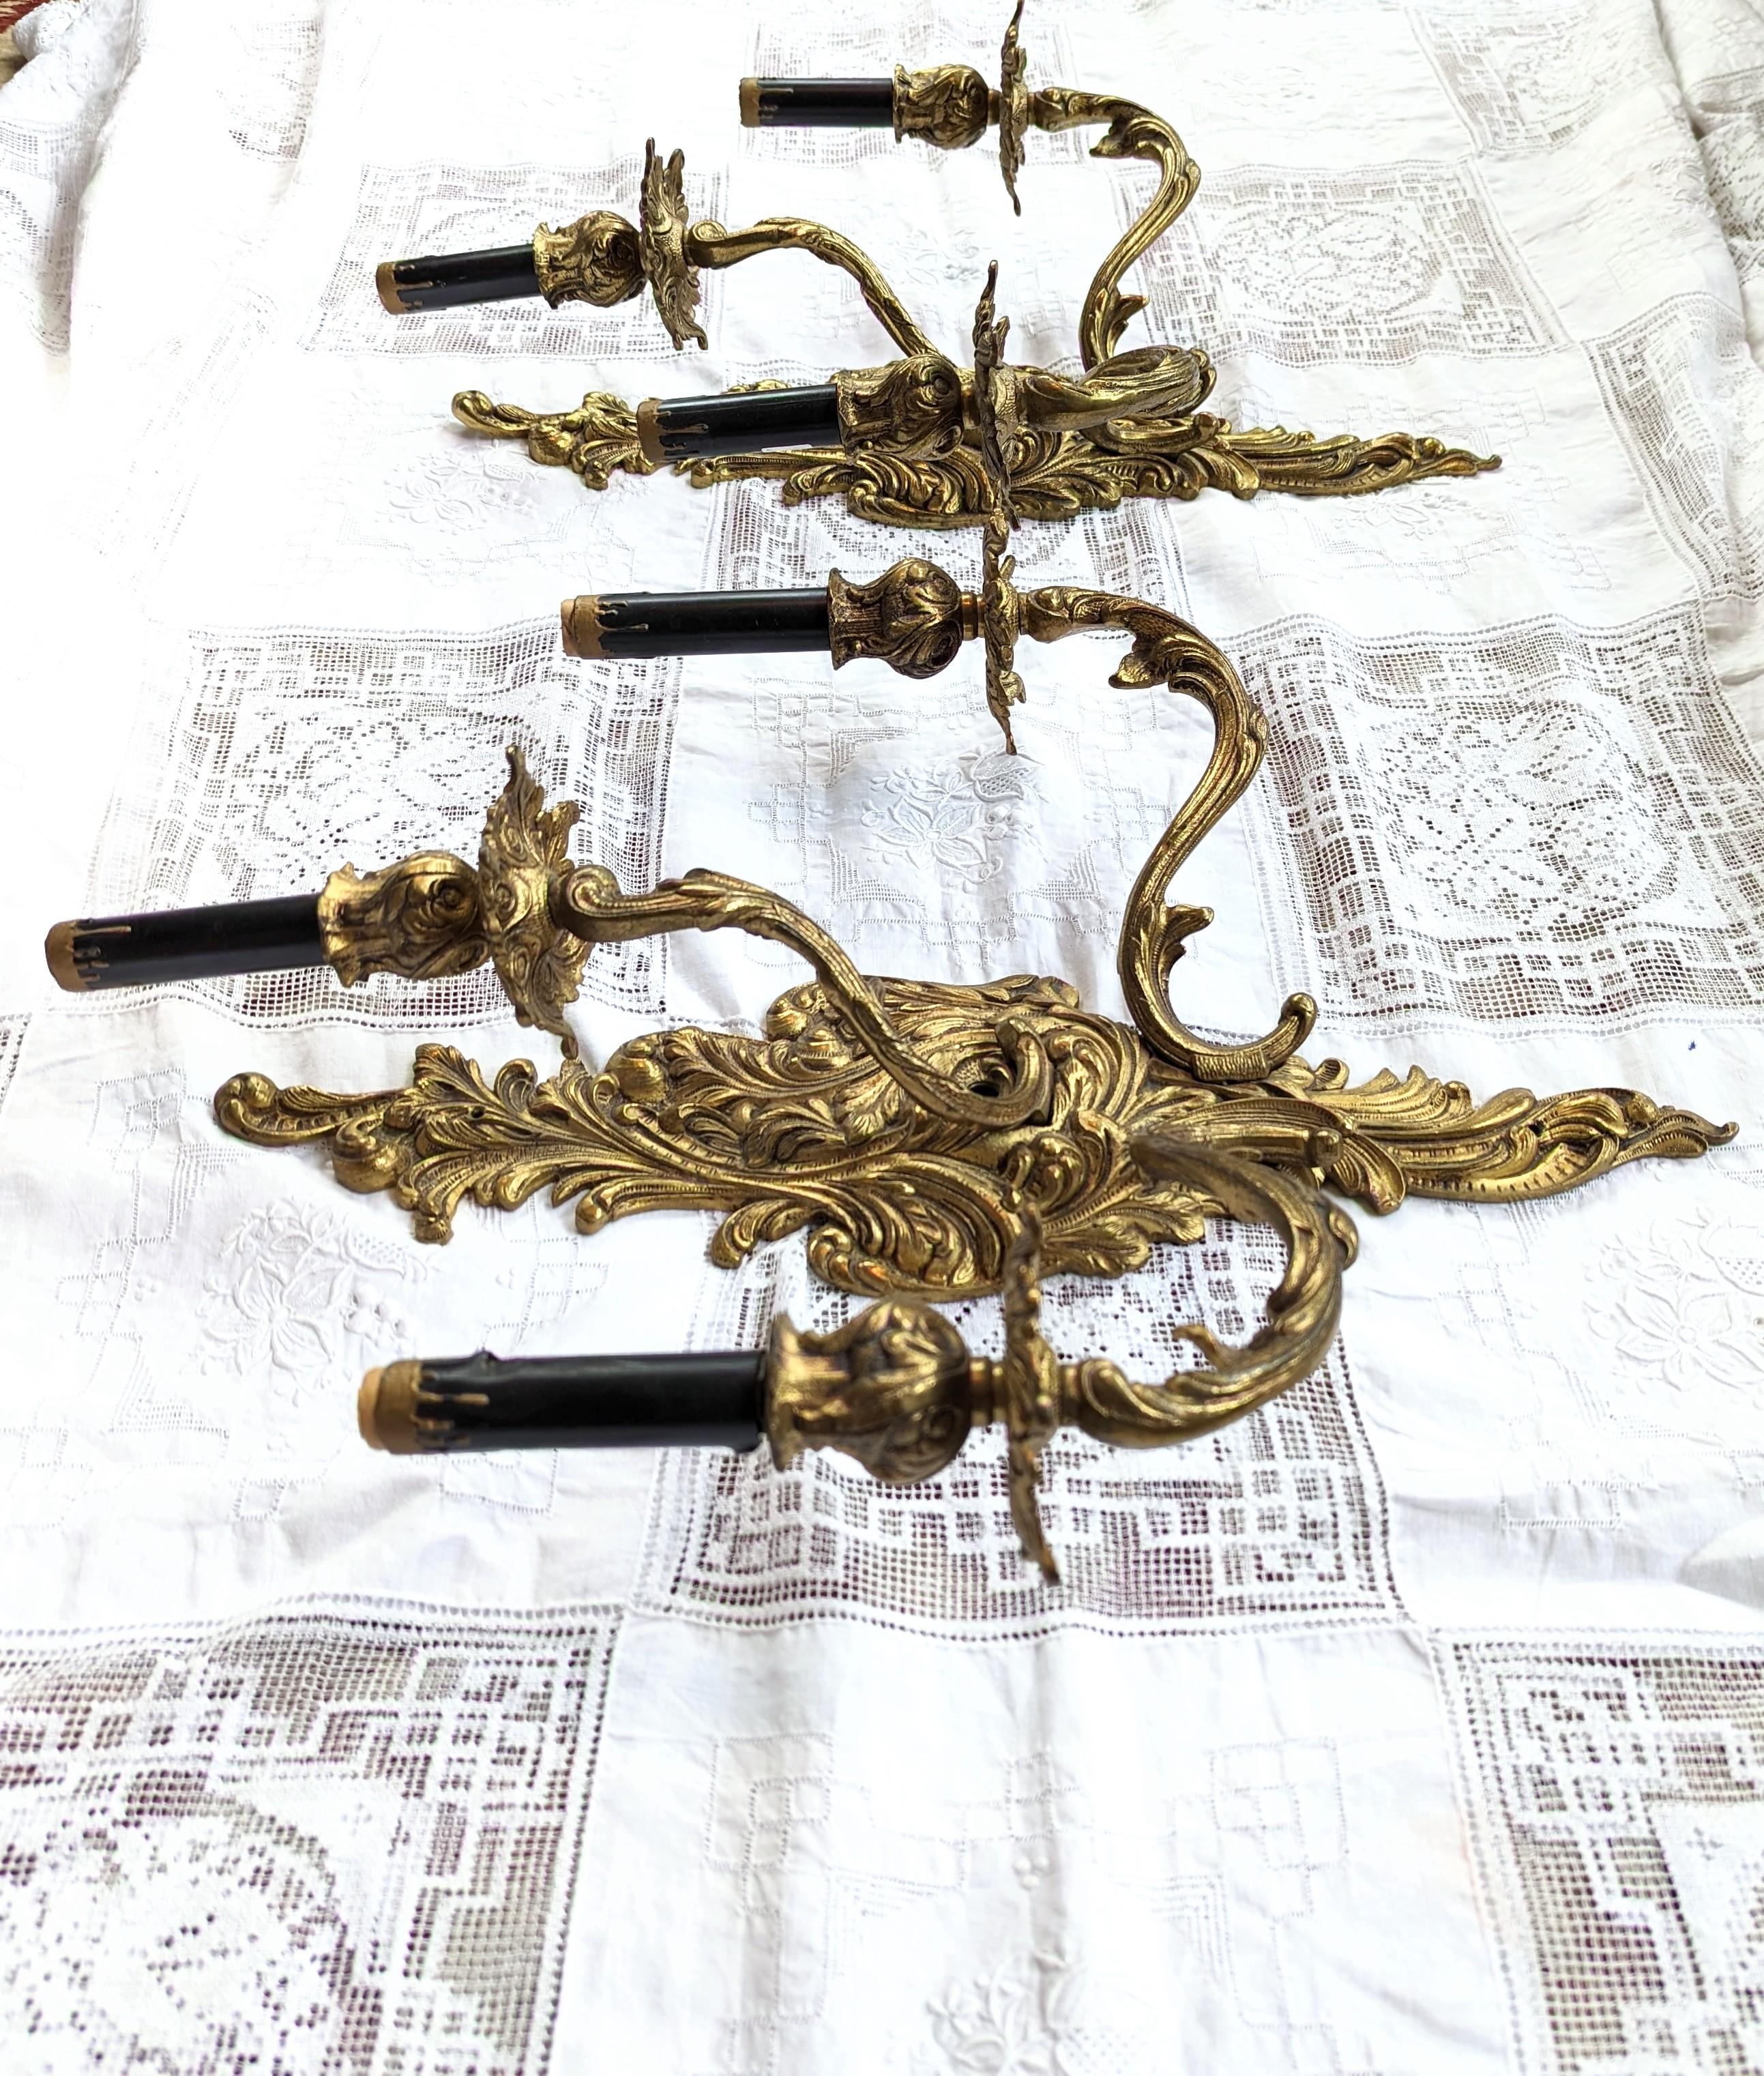 Pair of Antique French Gilded Sconces - 3 Light Armed Sconce European In Good Condition For Sale In Greer, SC